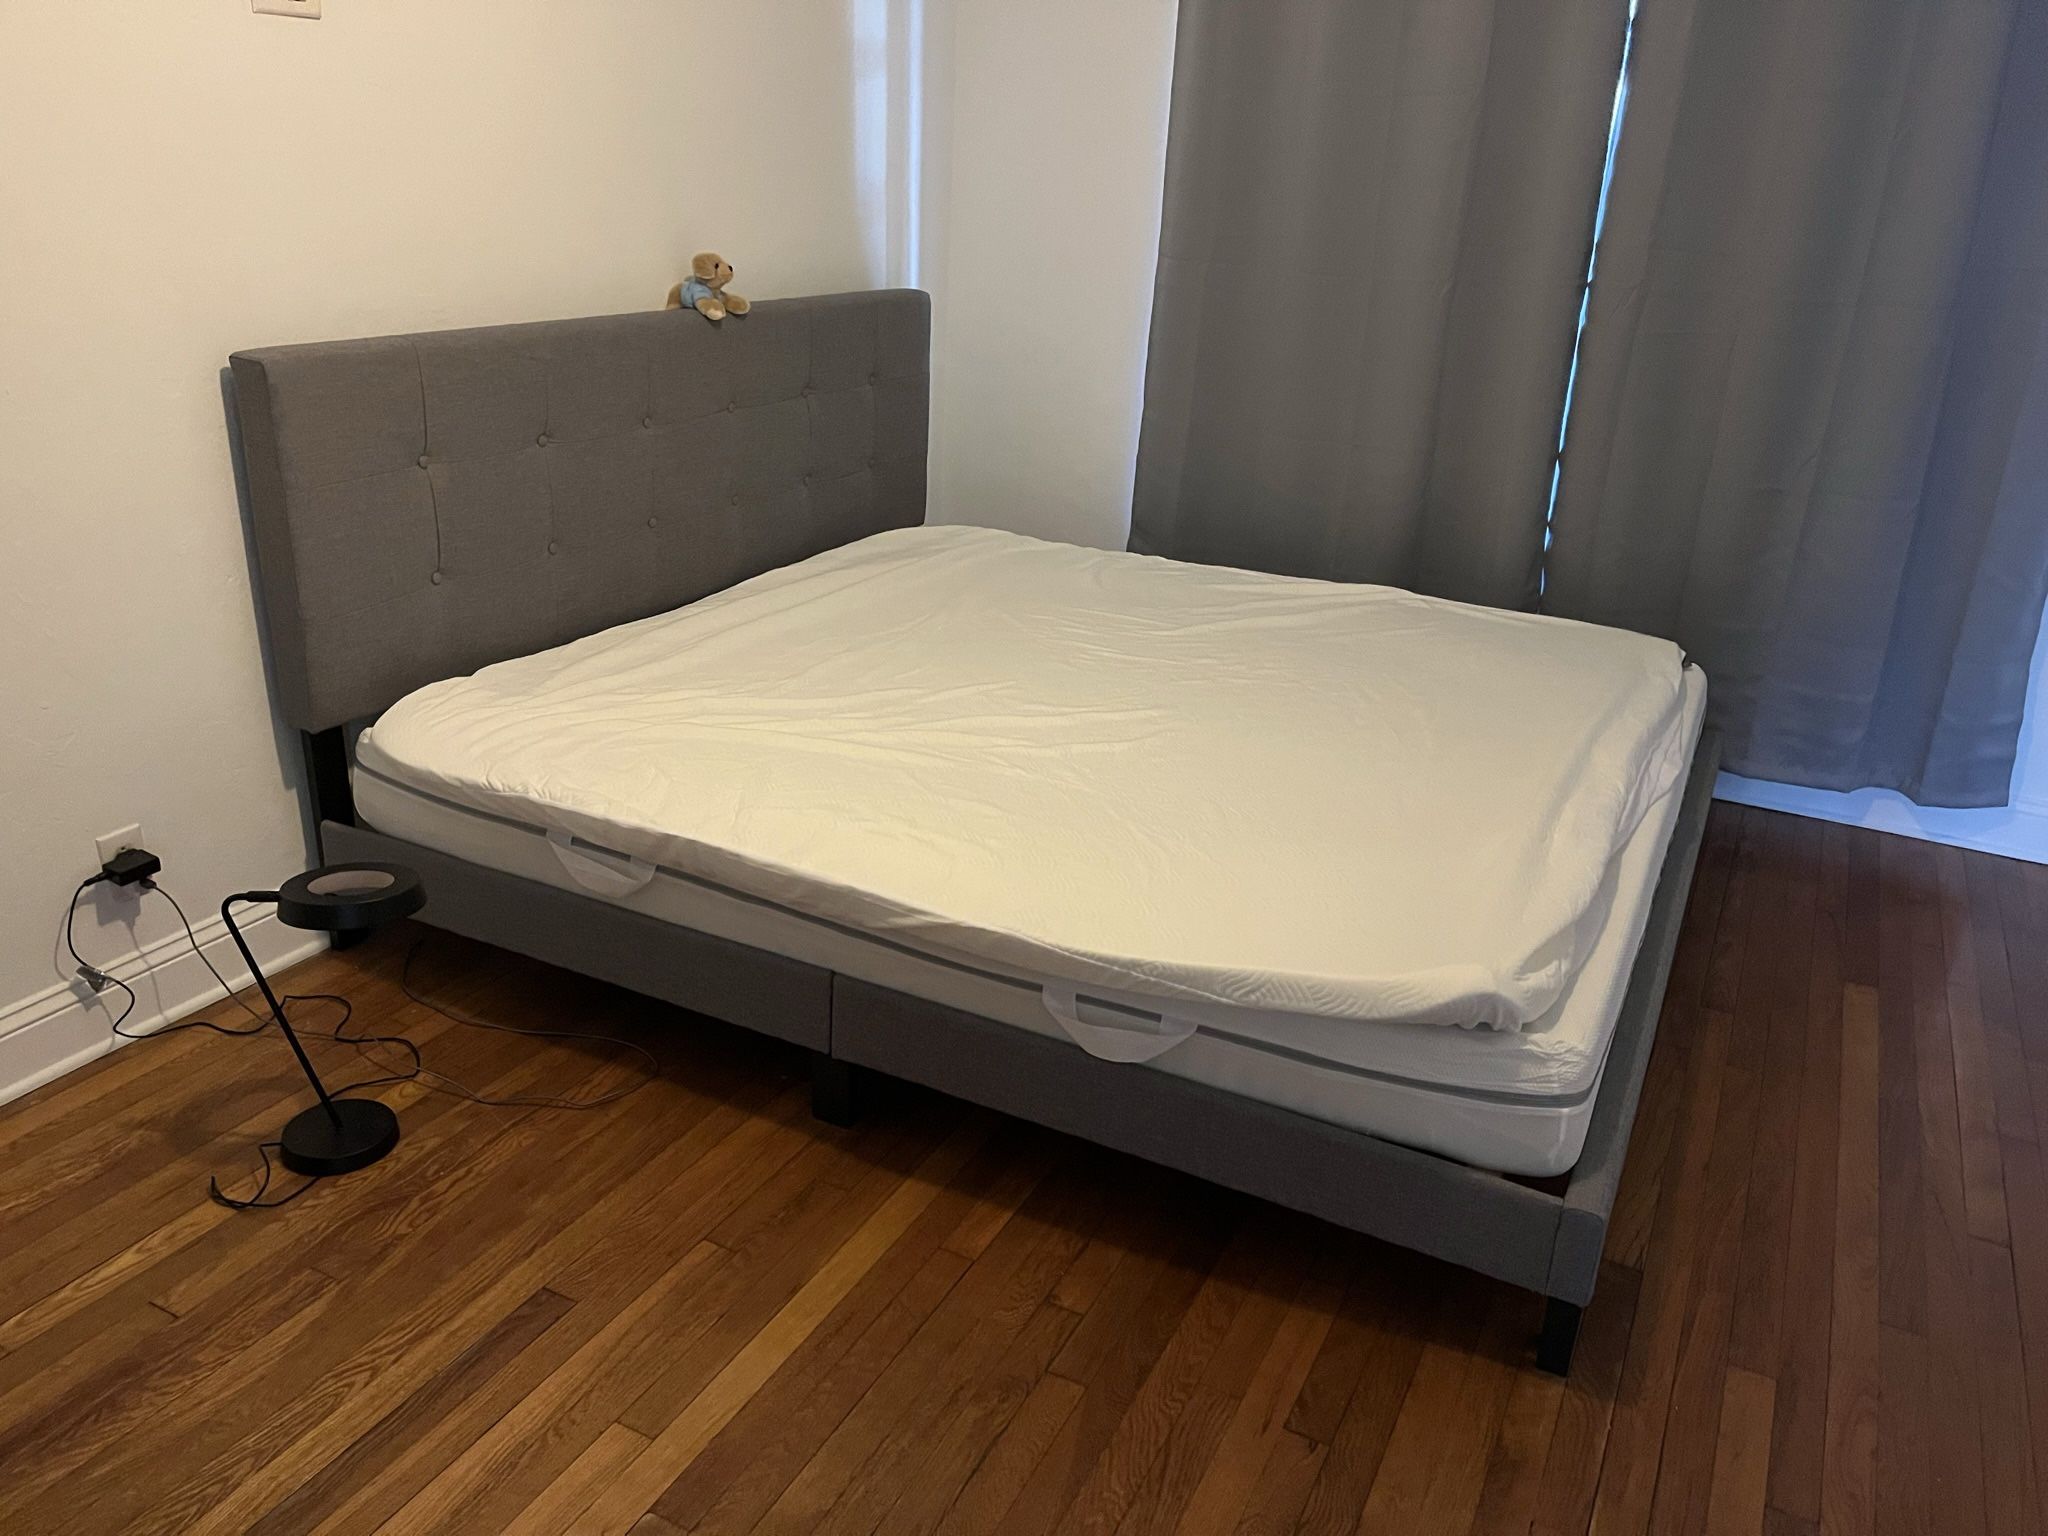 Bed Frame, Mattress, and Mattress Topper - King Size  - One Price For All Three